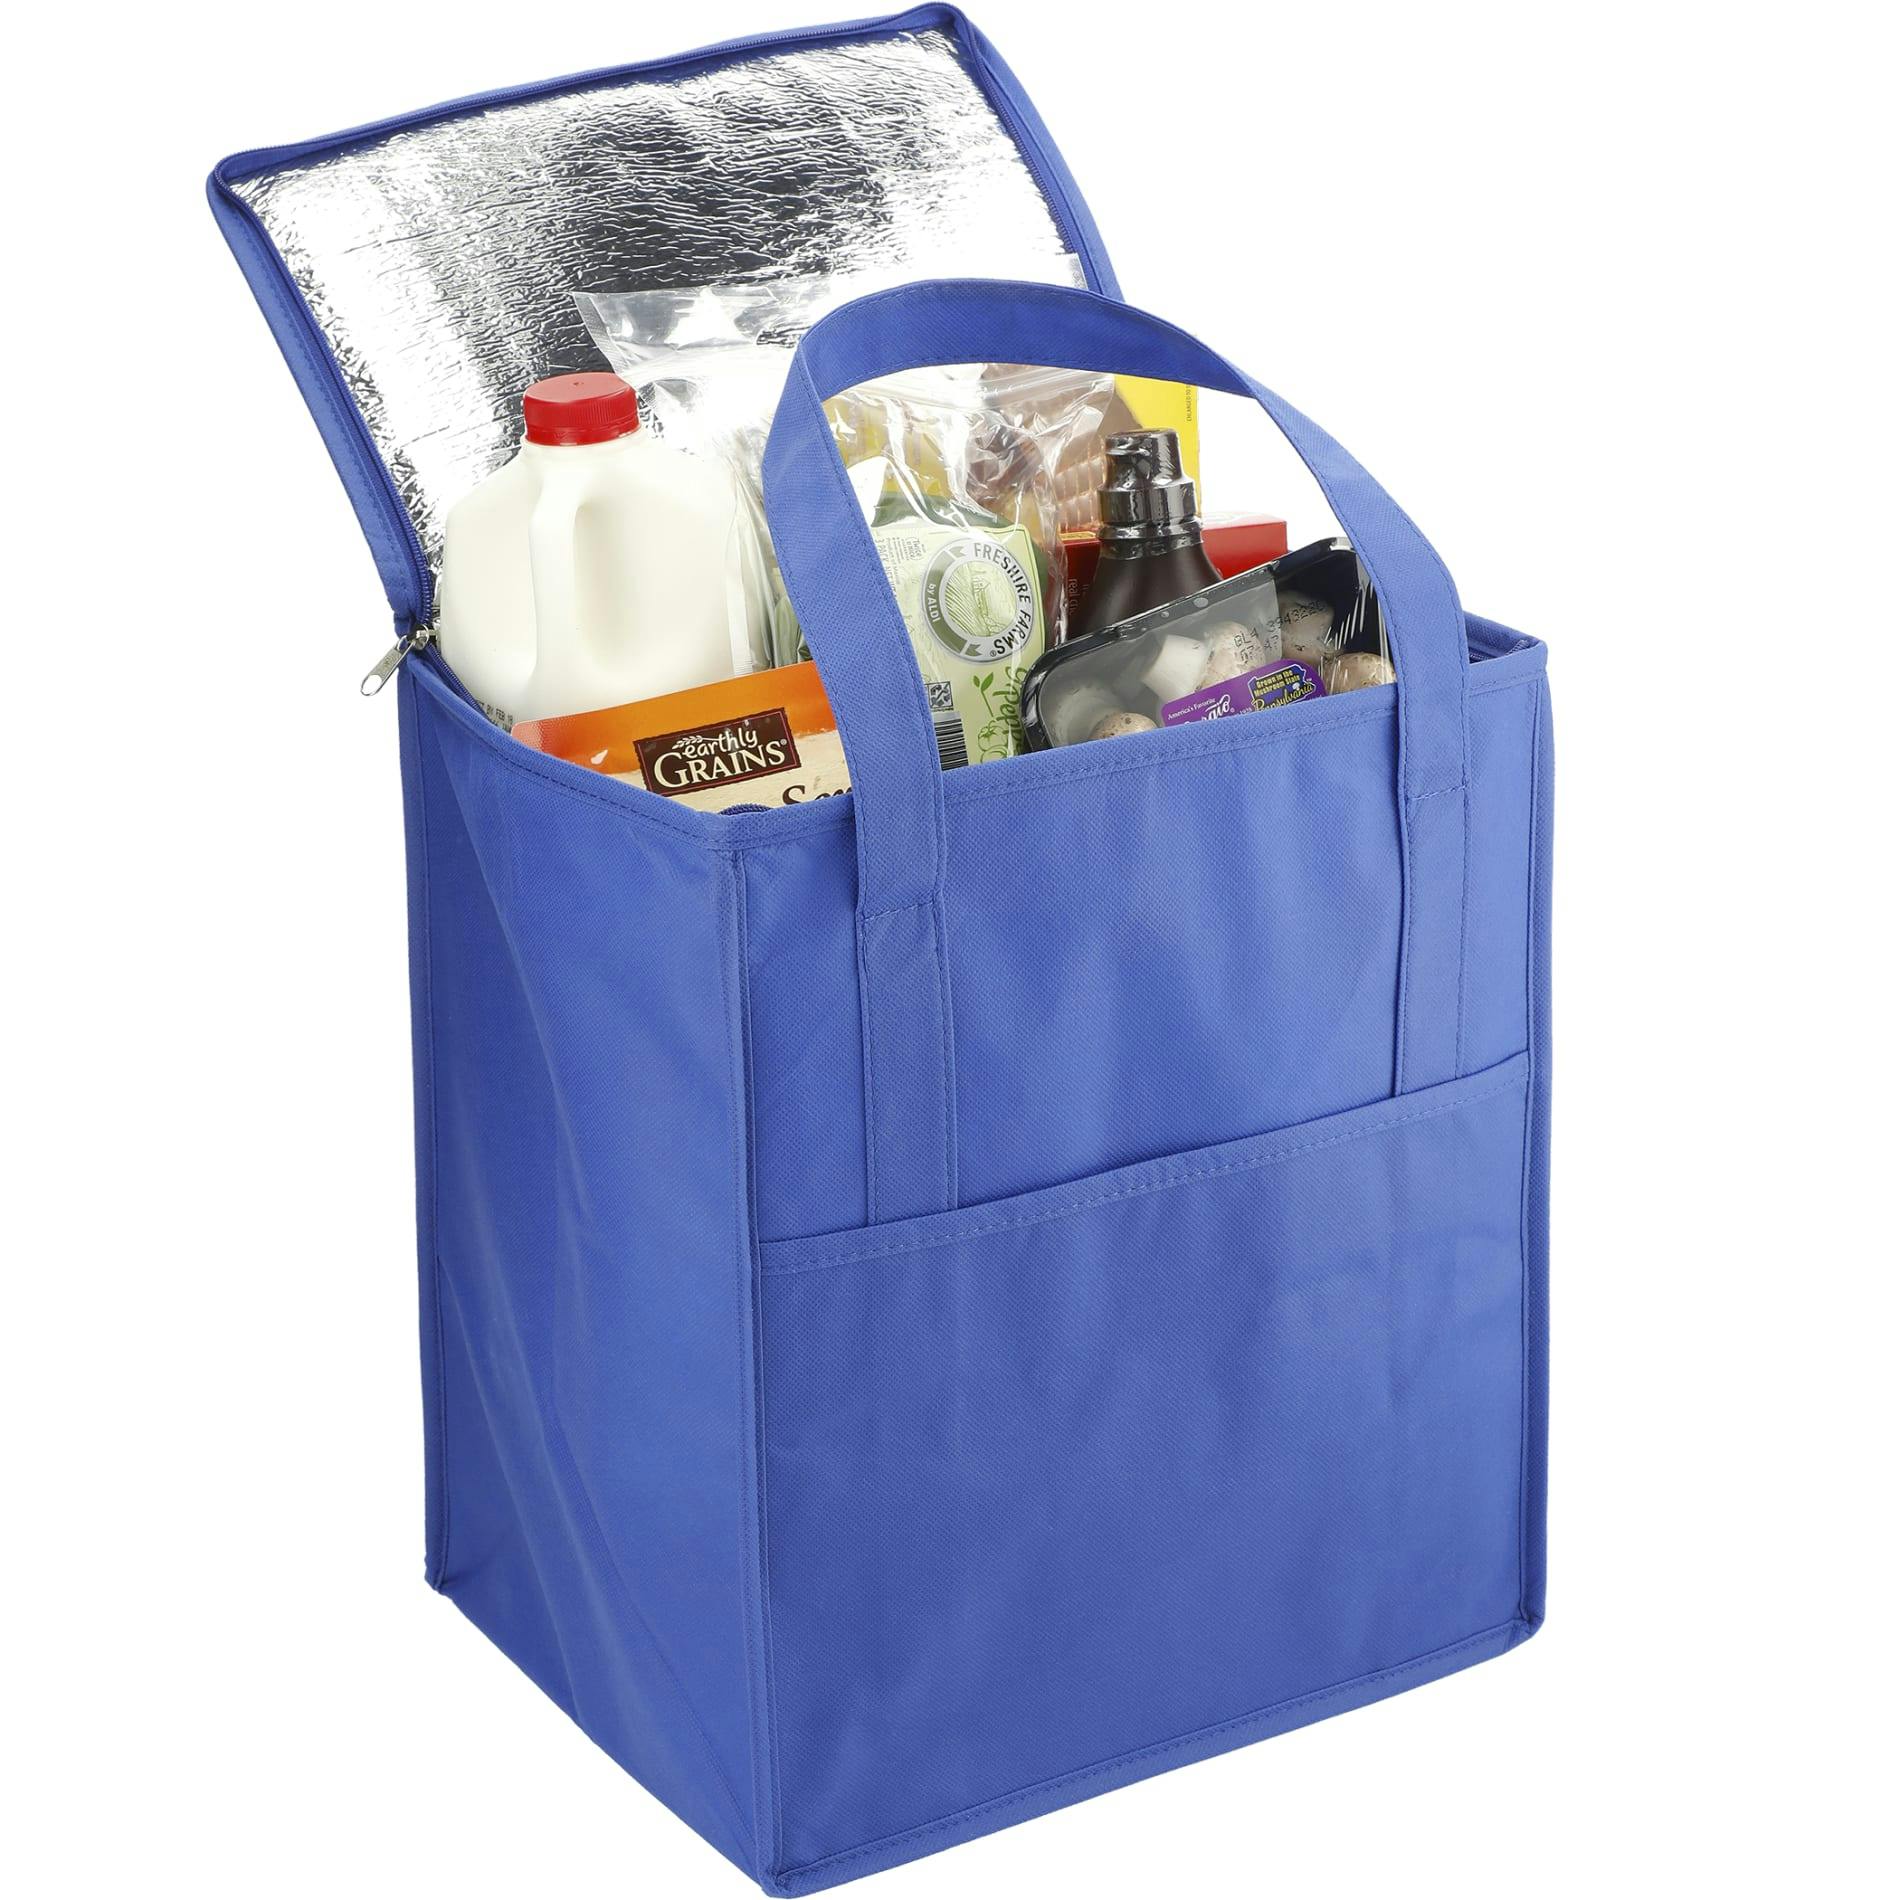 Hercules Flat Top Insulated Grocery Tote - additional Image 6